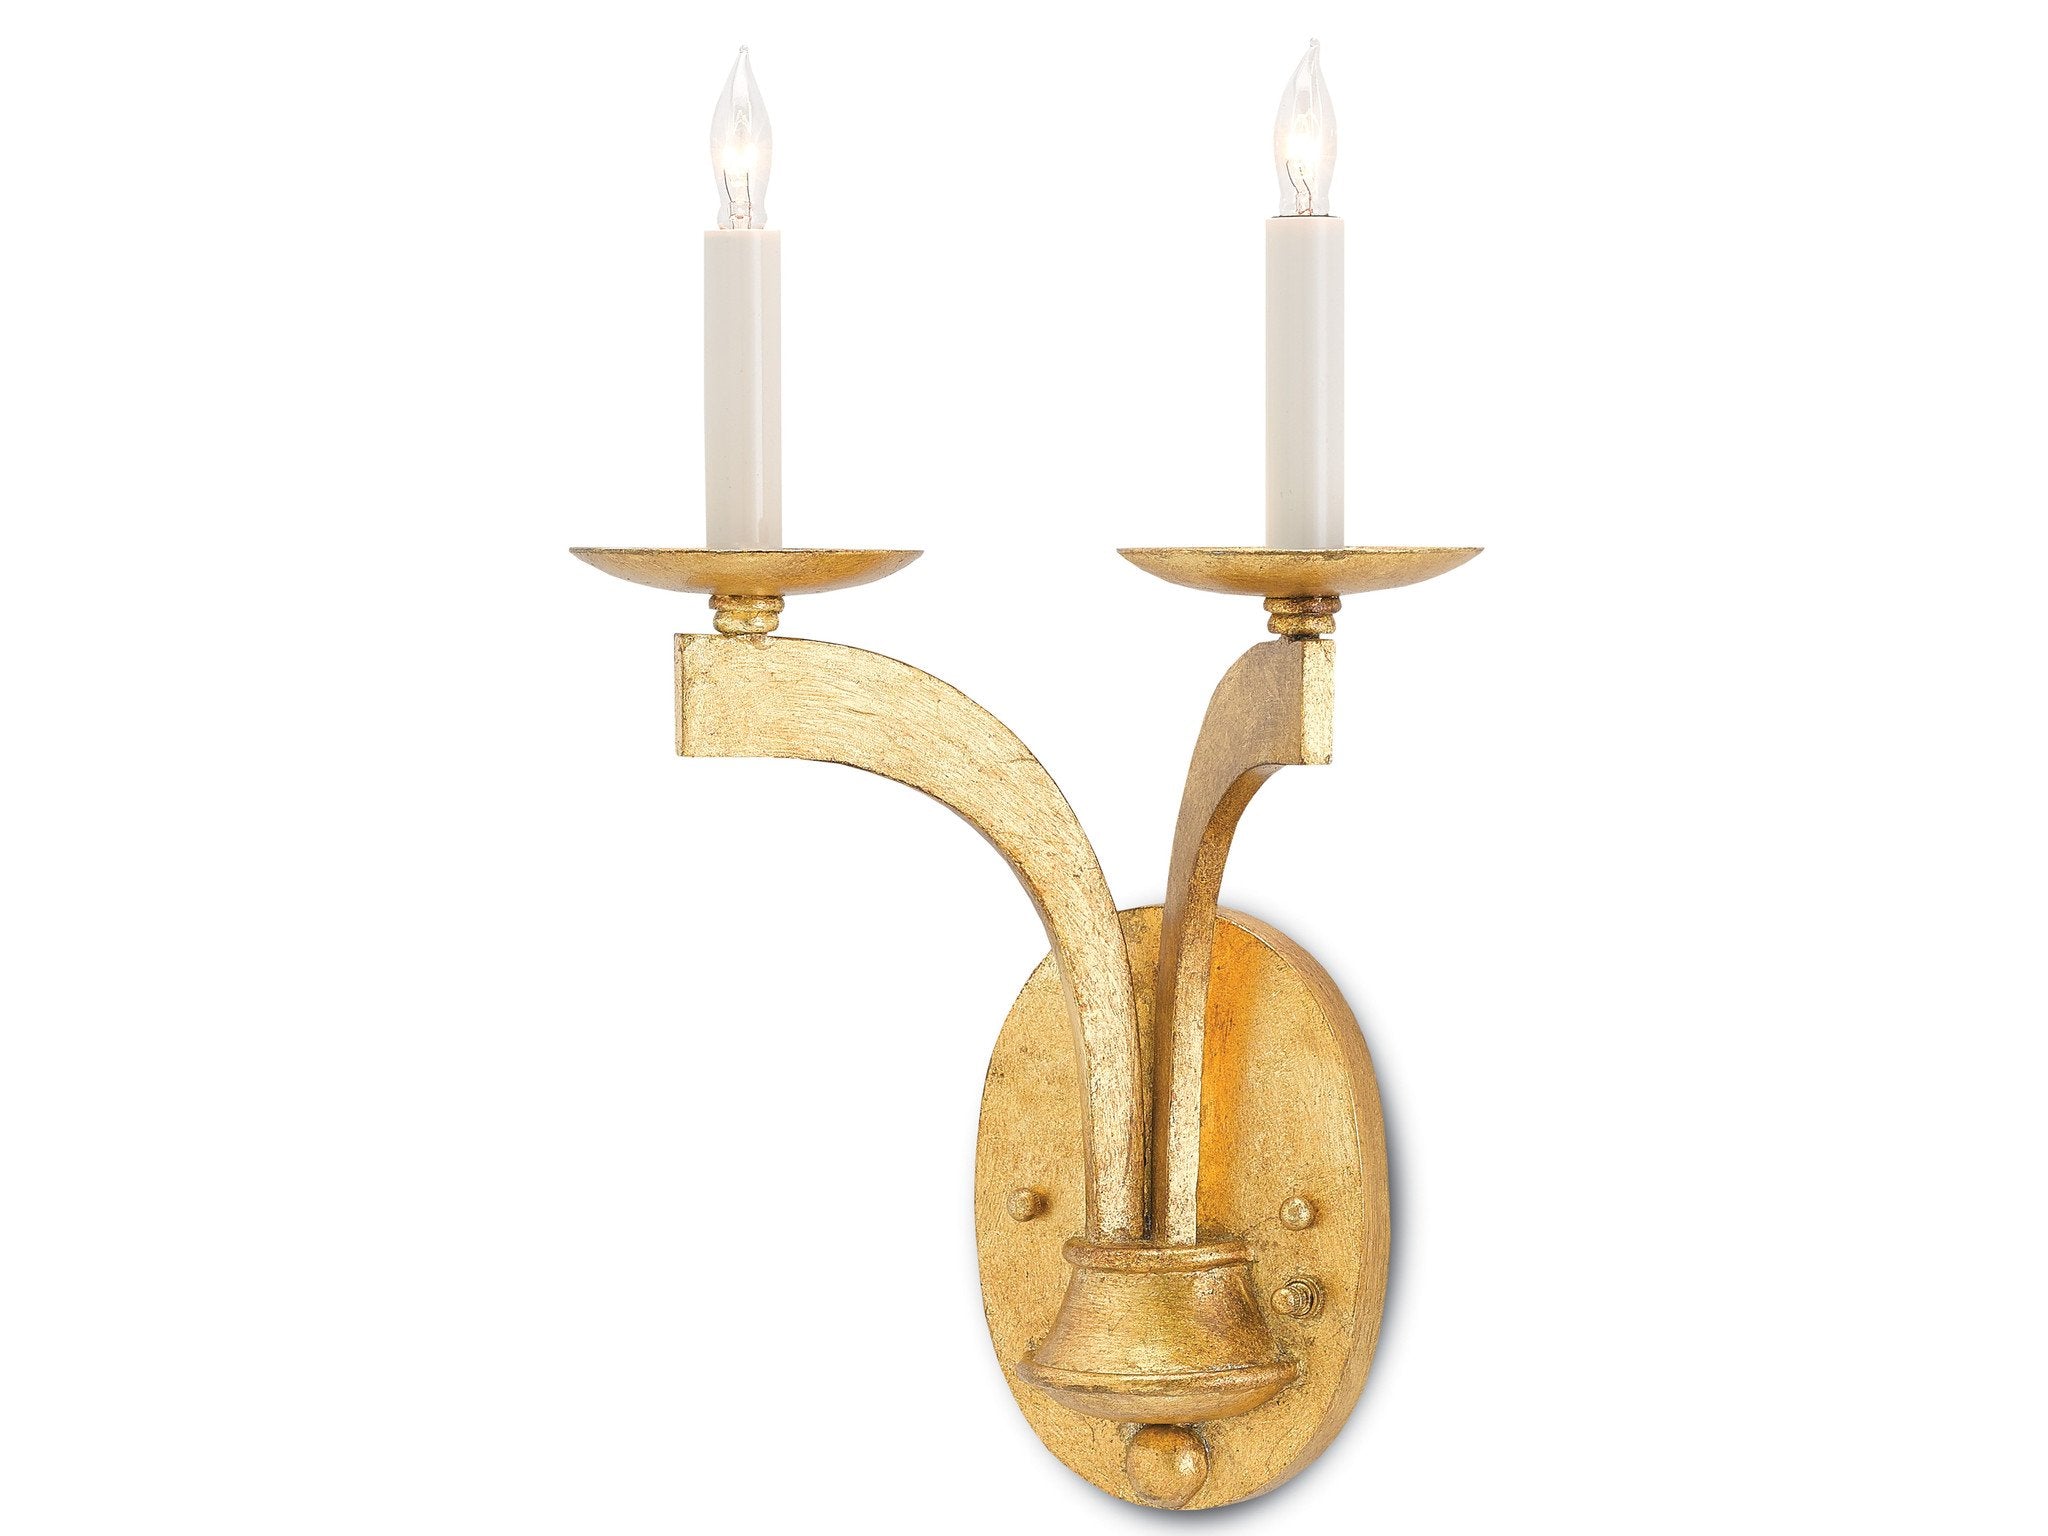 Venus Wall Sconce in Antique Gold Leaf design by Currey and Company